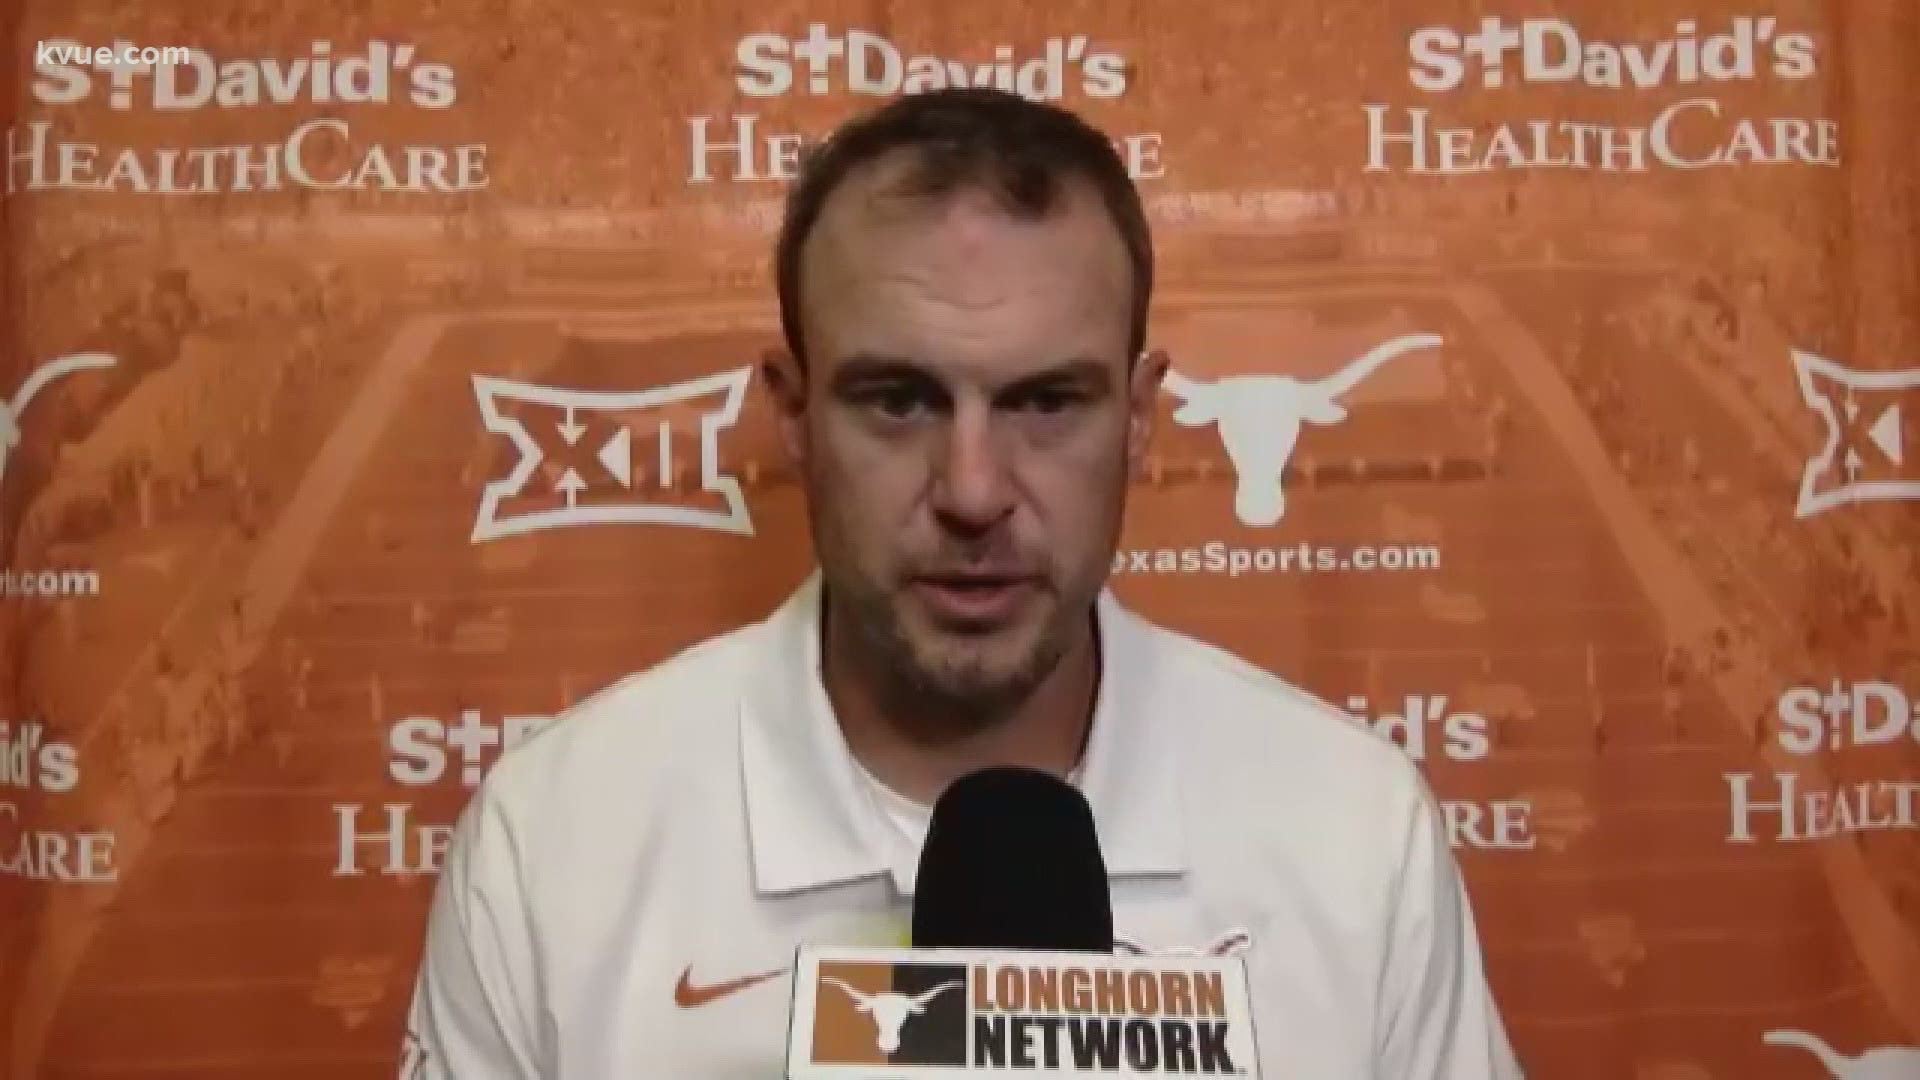 Texas Longhorns head coach Tom Herman told the media his team measures themselves by one thing: win.